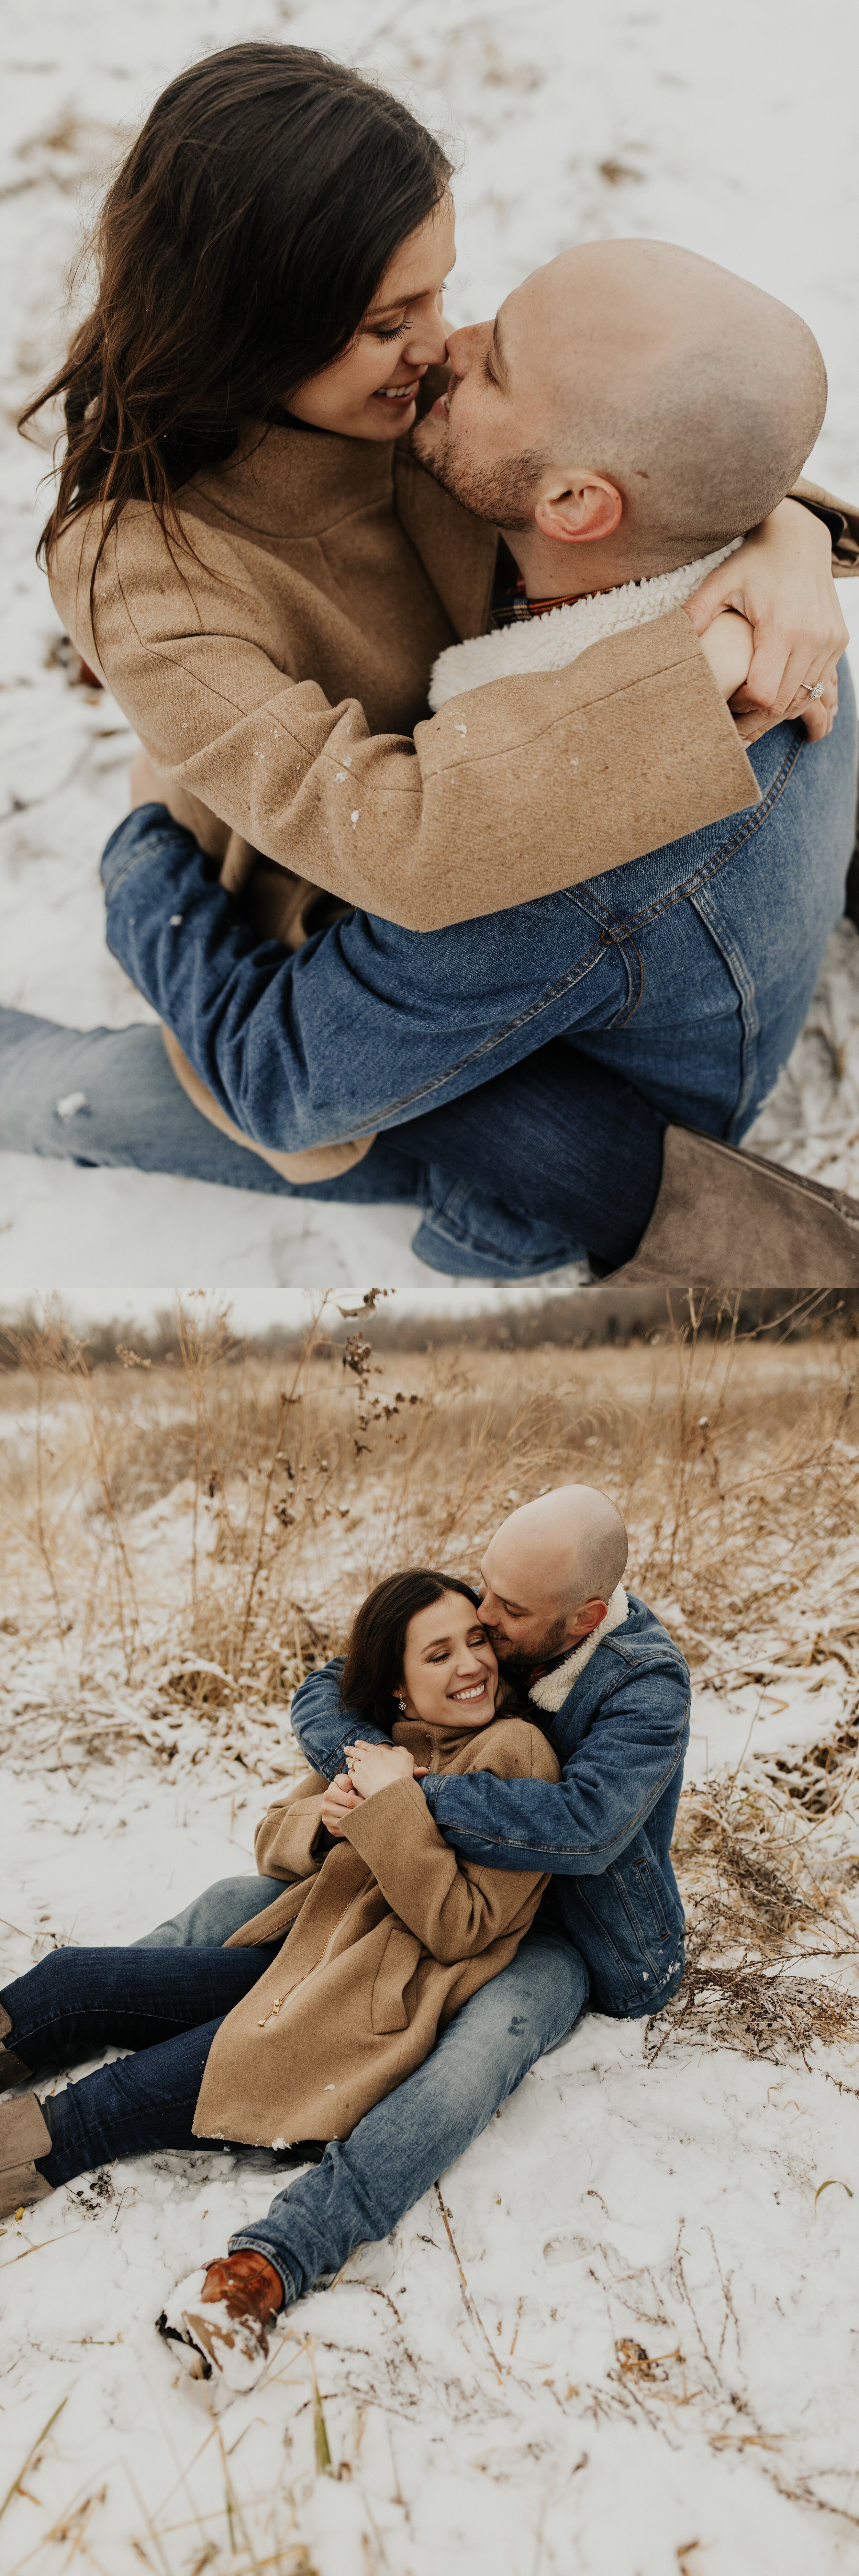 jessika-christine-photography-outdoor-engagement-couples-snow-adventurous-session (17).jpg